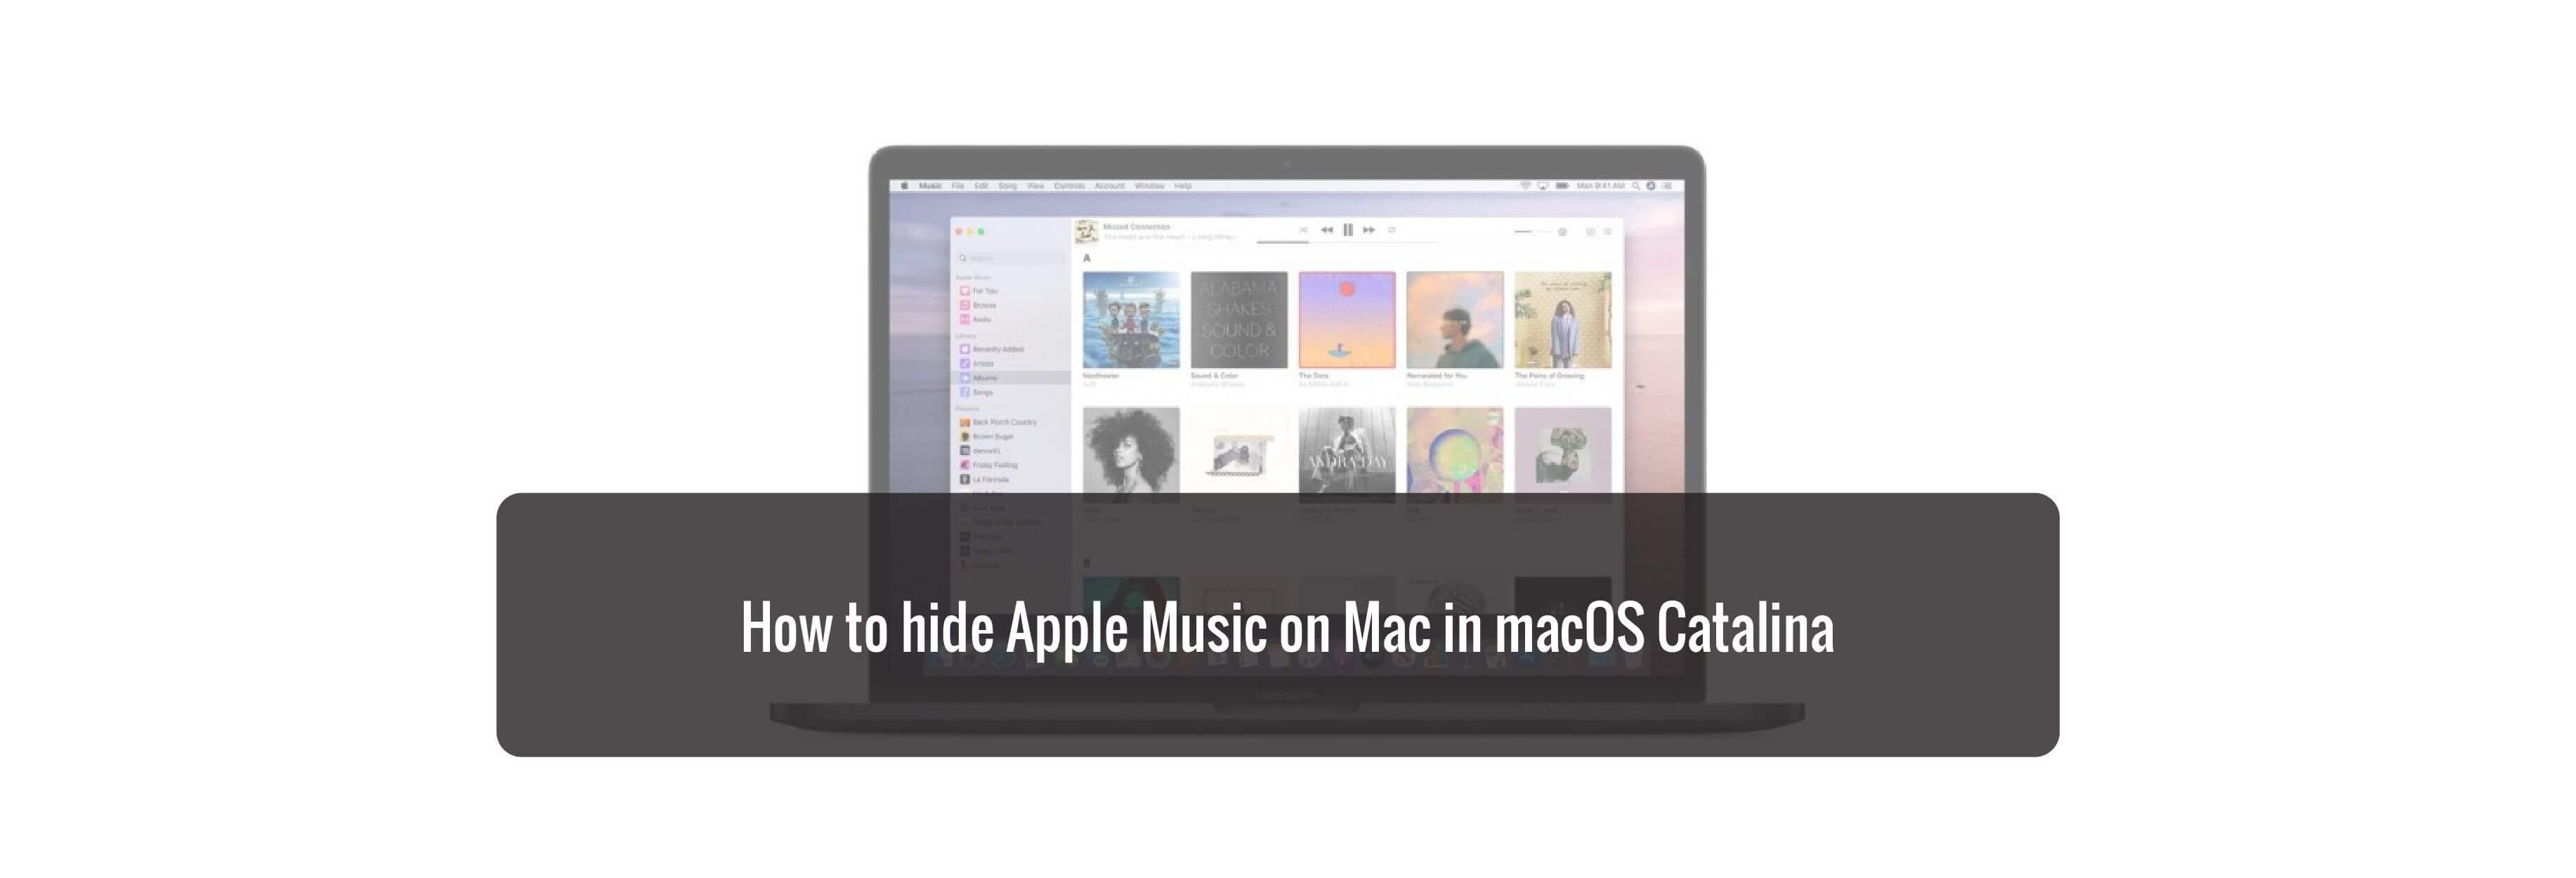 How to hide Apple Music on Mac in macOS Catalina